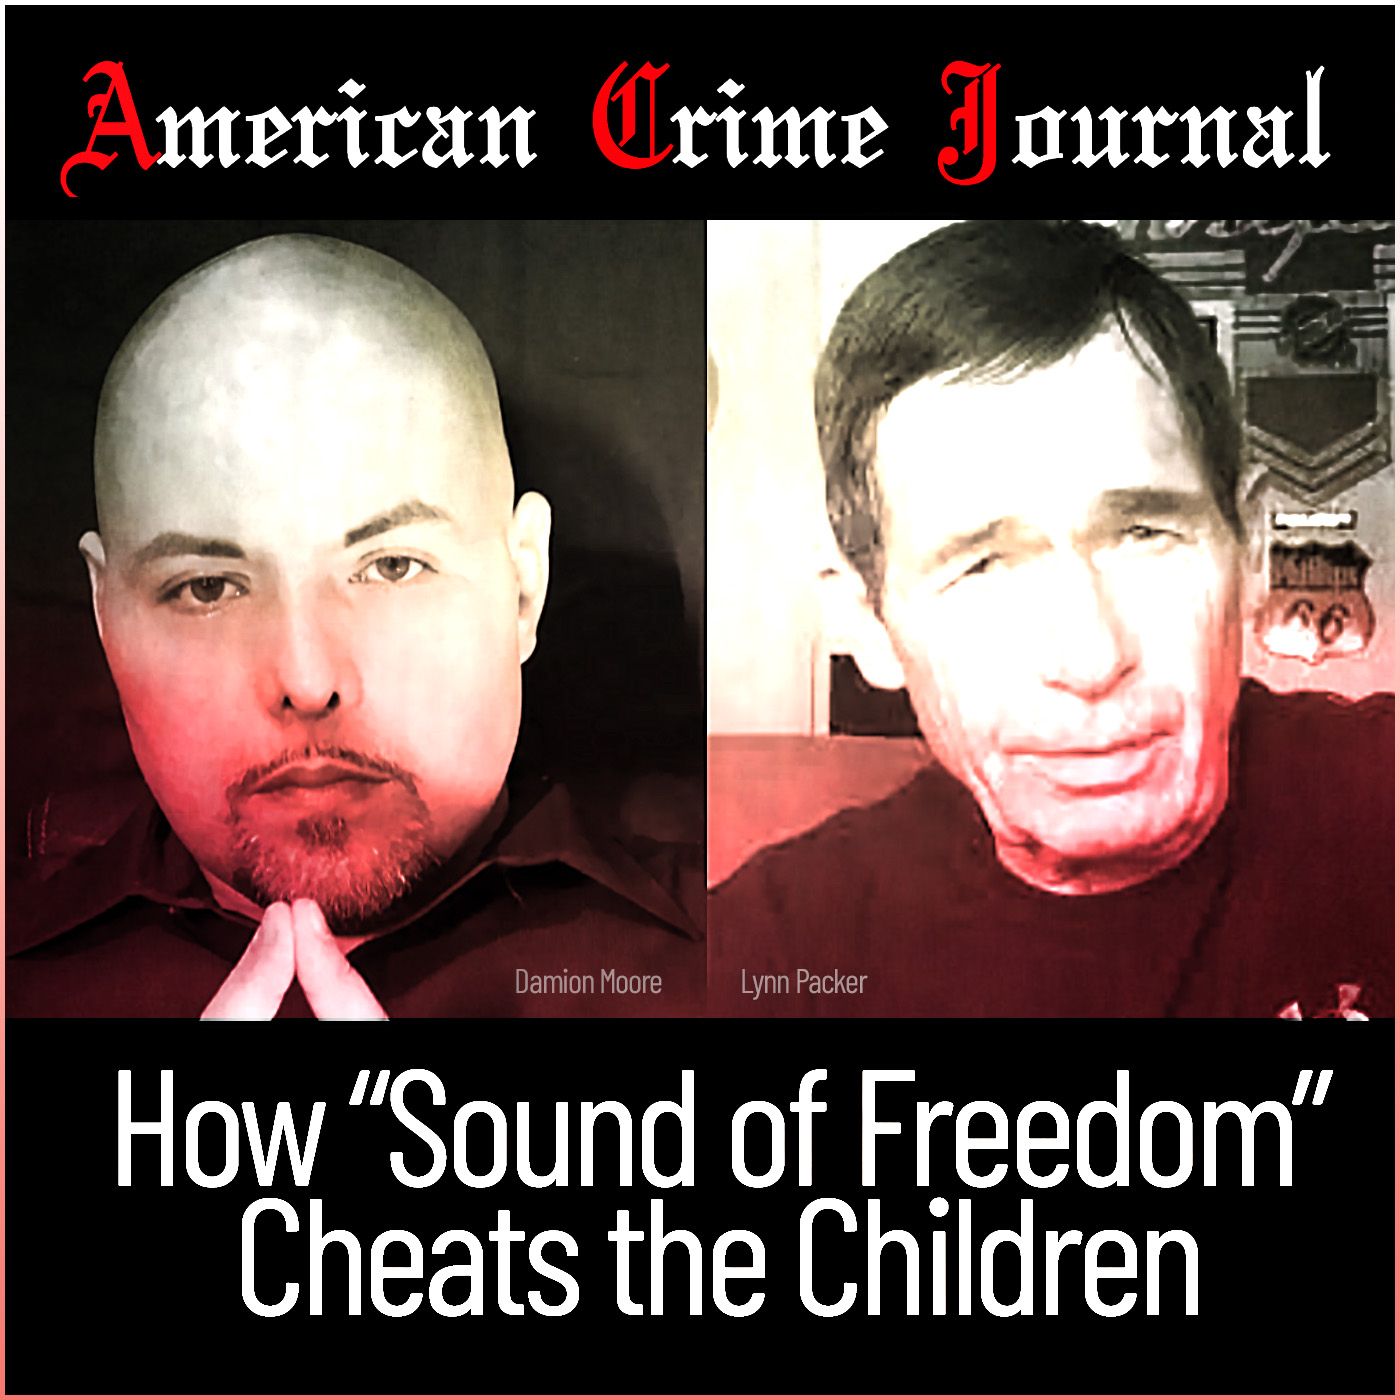 How ”Sound of Freedom” Cheats the Children: with Damion Moore and Lynn Packer of American Crime Journal